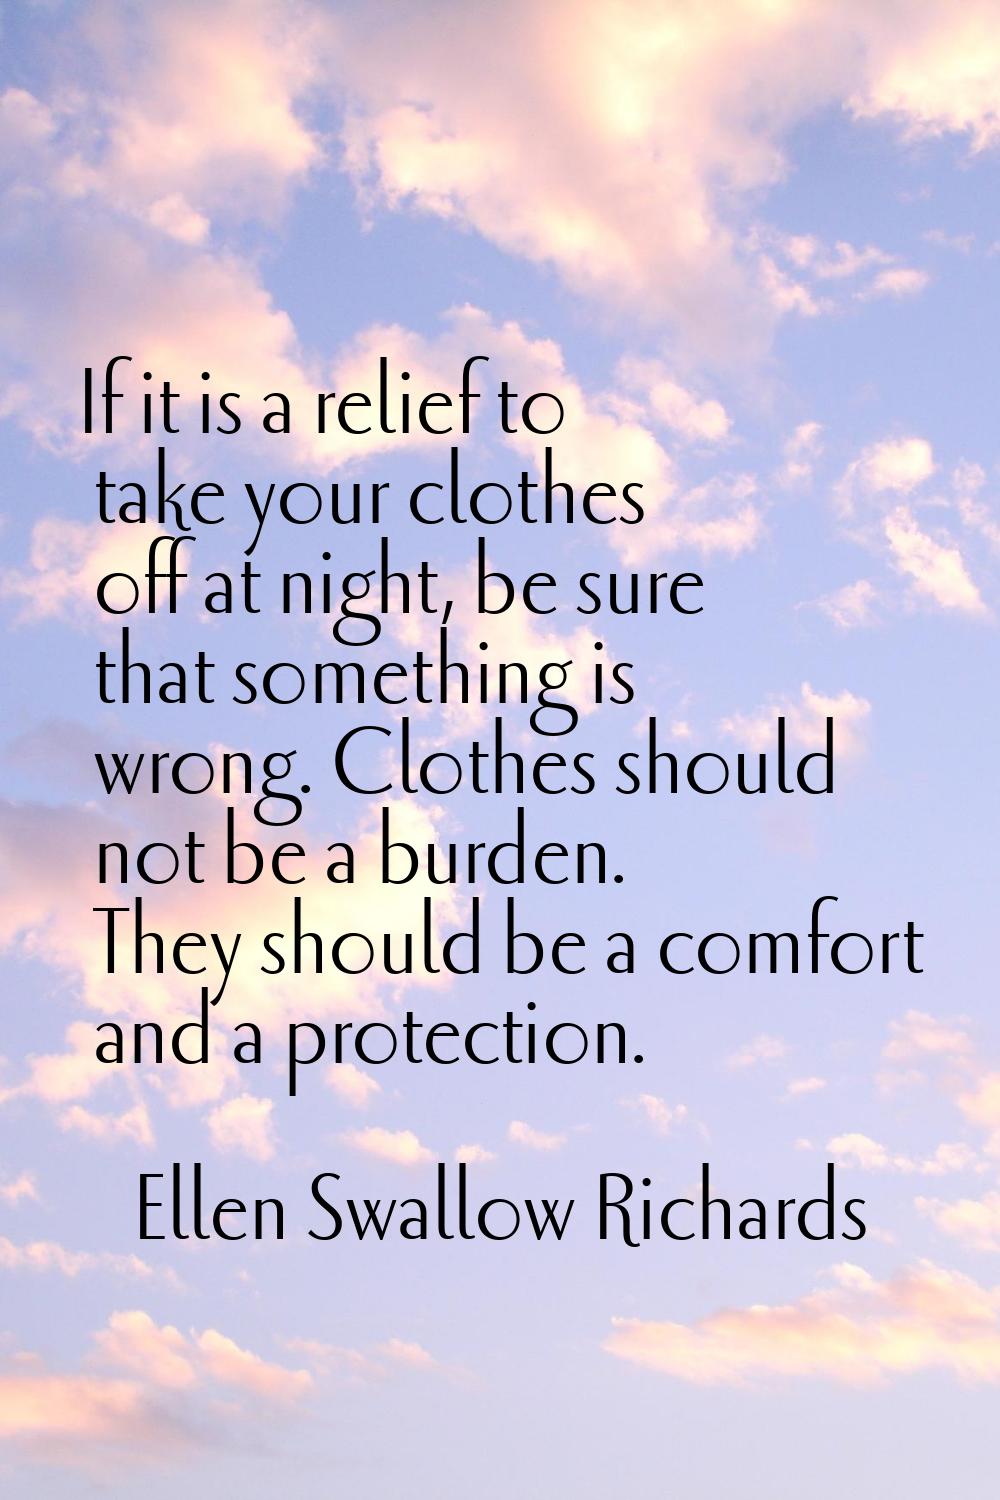 If it is a relief to take your clothes off at night, be sure that something is wrong. Clothes shoul